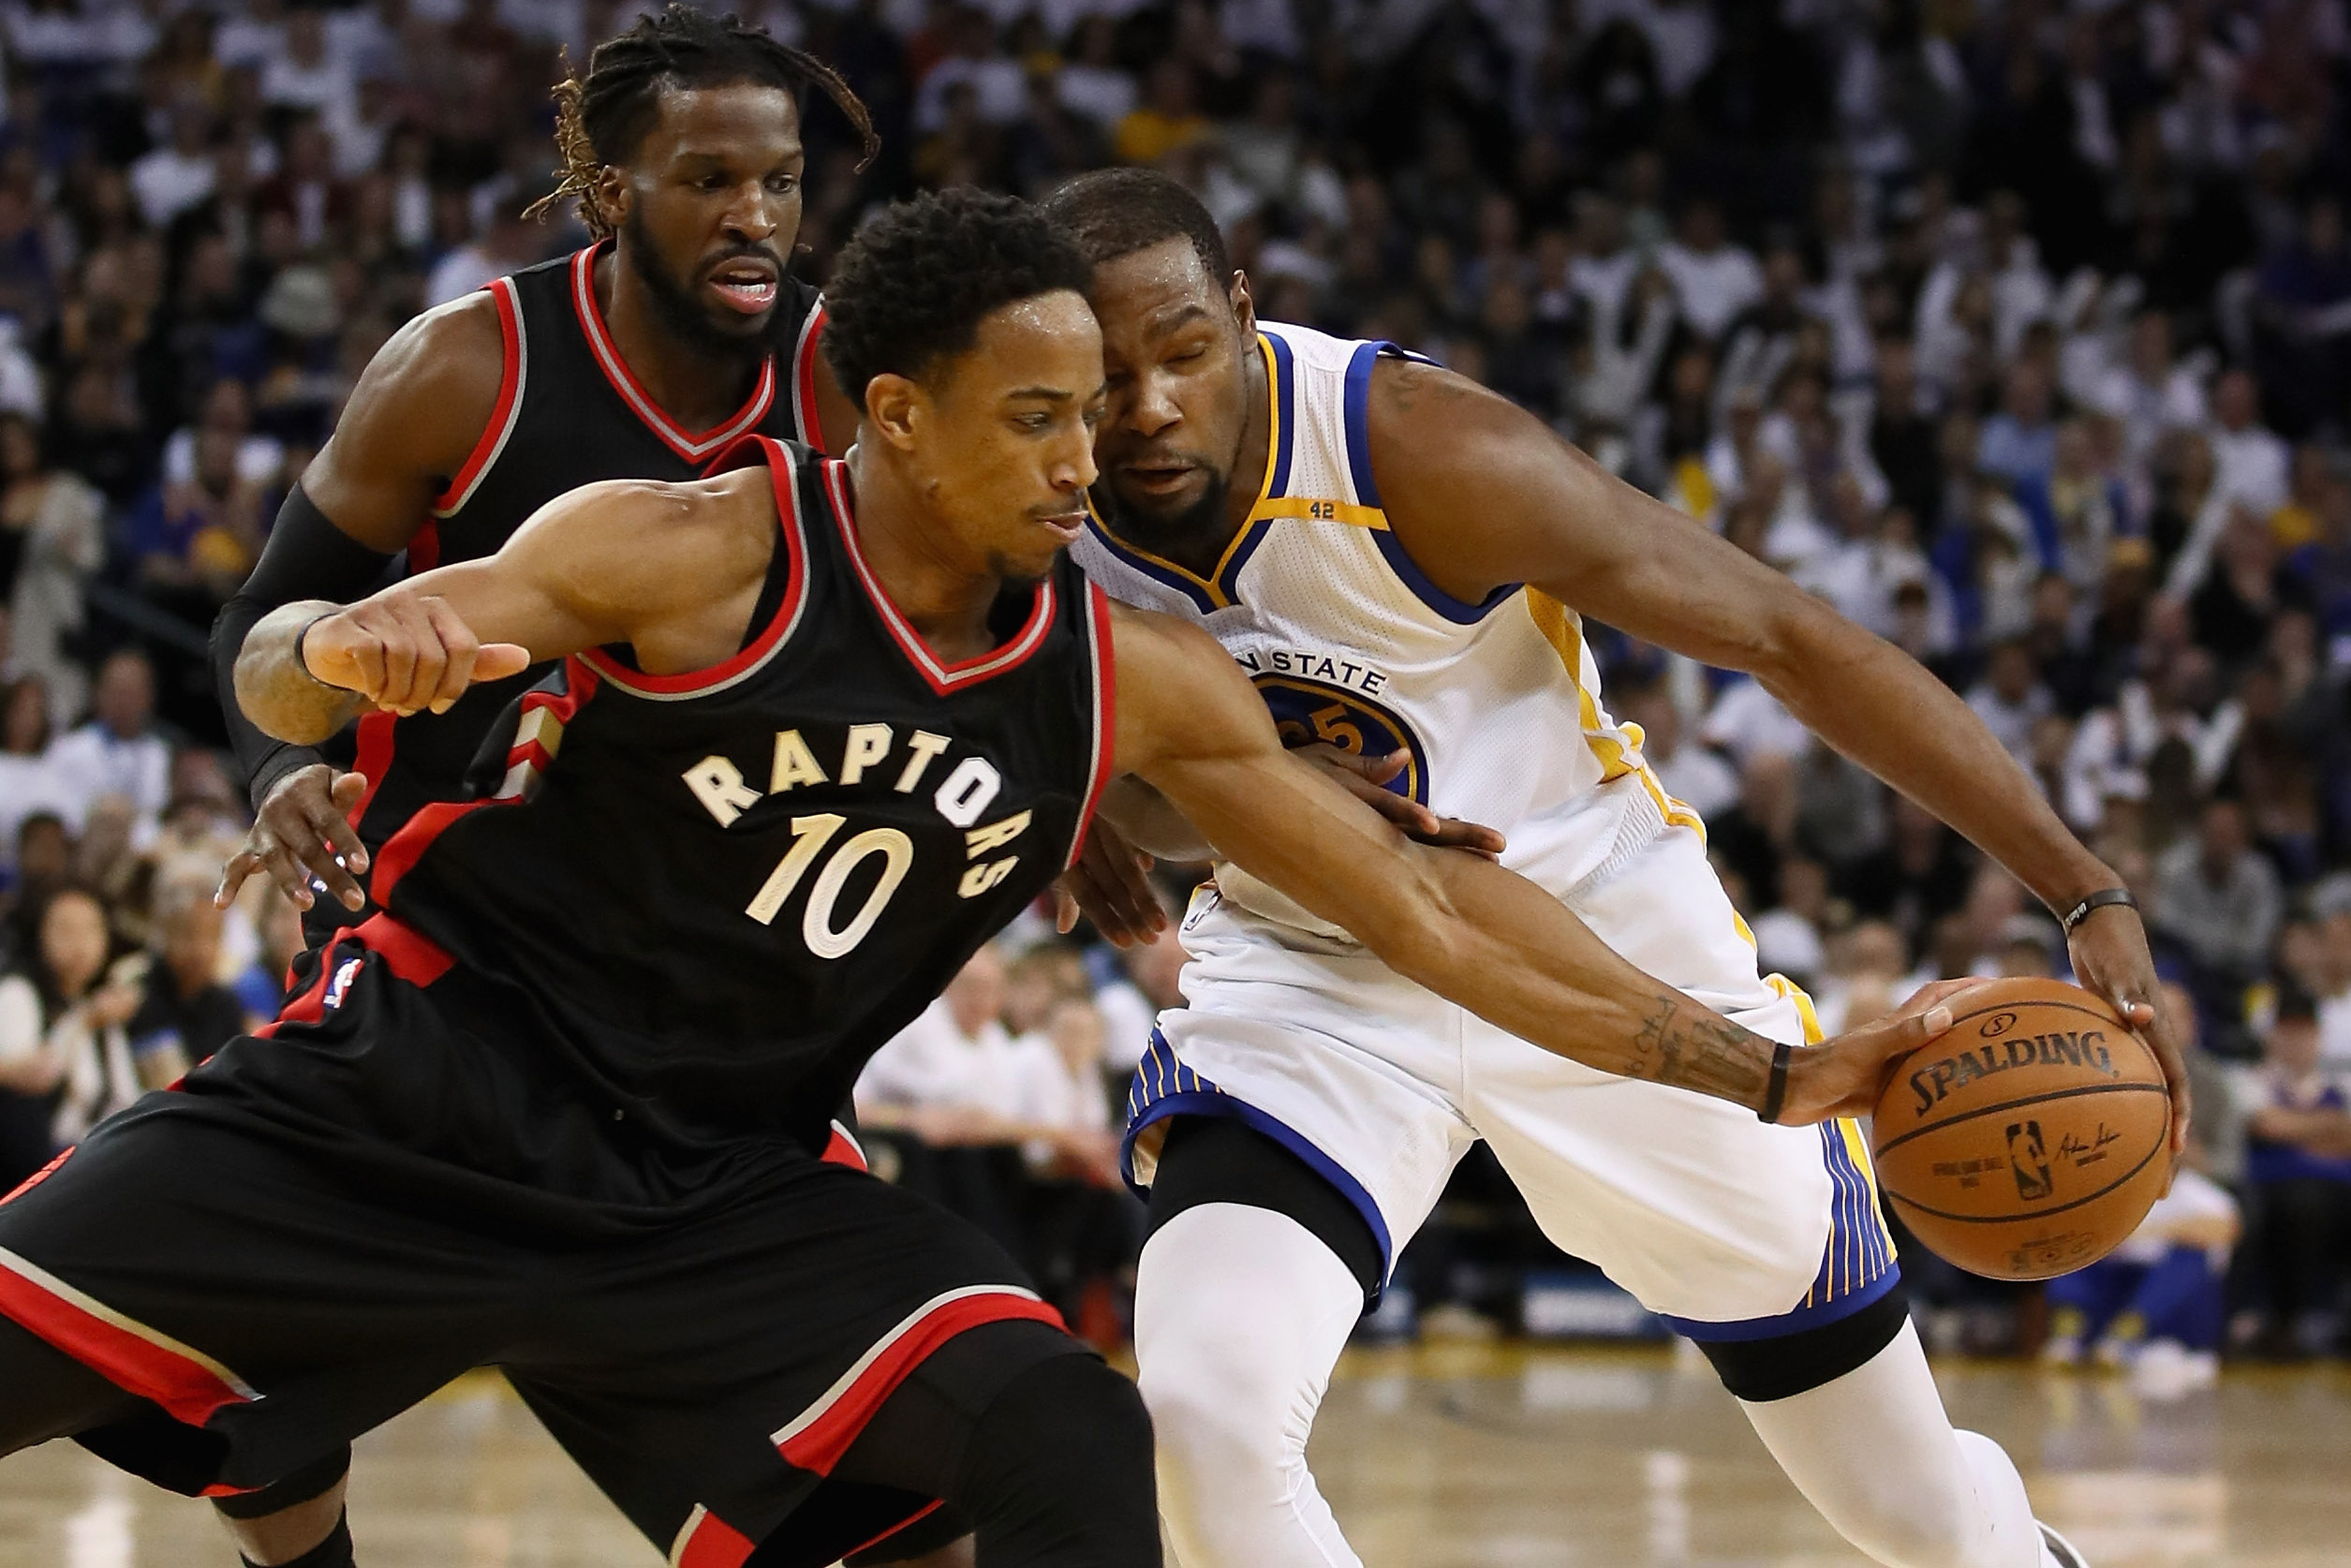 Crazy Stats - DeMar DeRozan became the fourth player in franchise